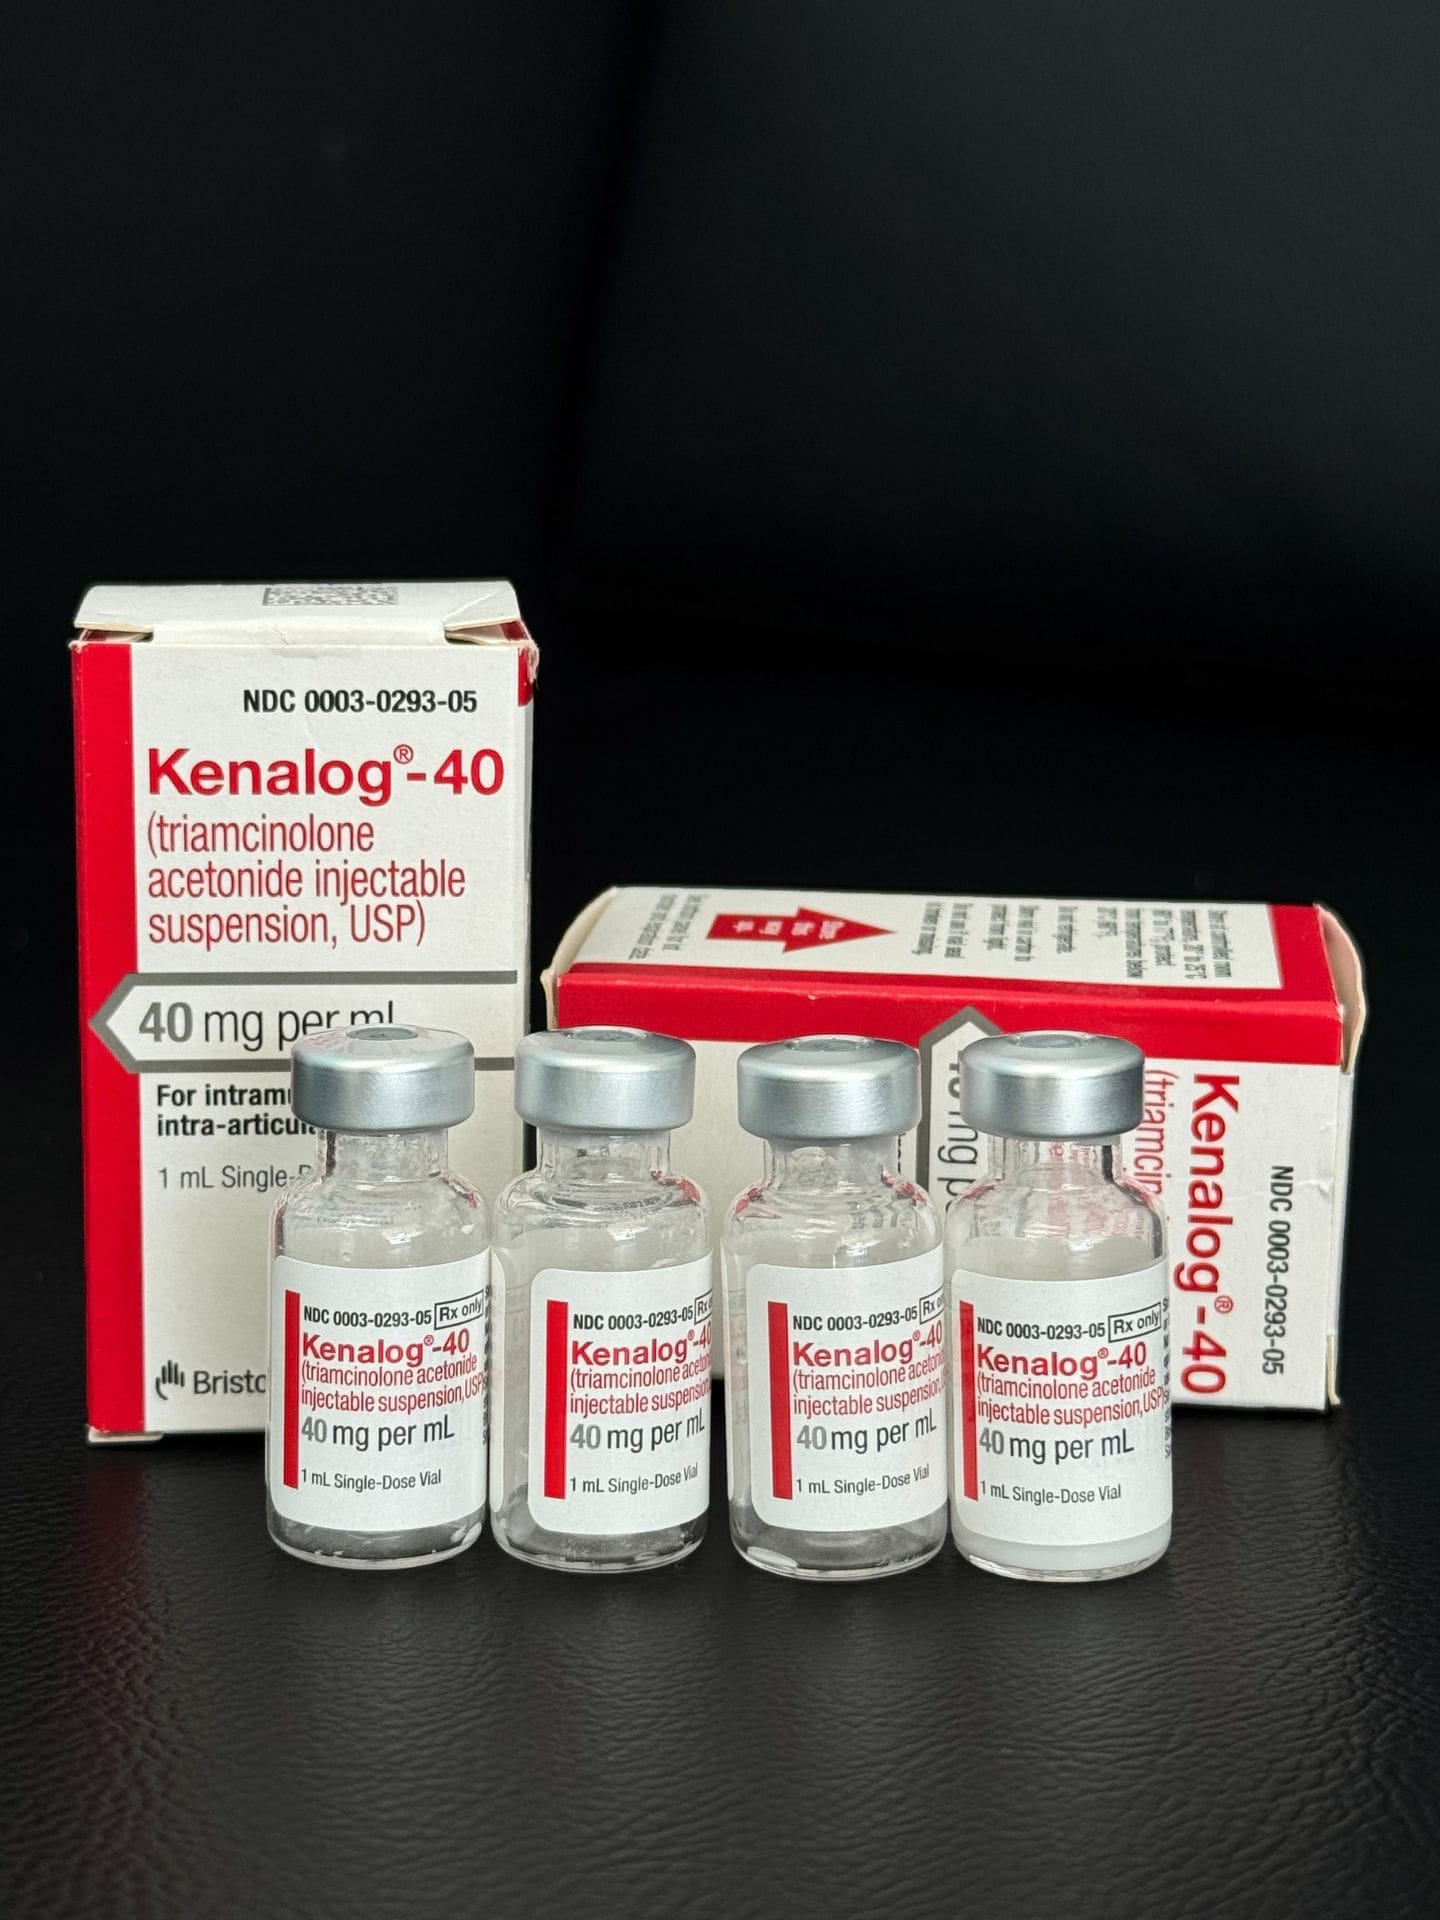 Kenalog Keloid Removable Injectable Treatment Red And White Boxes And Flasks Showcasing The Product